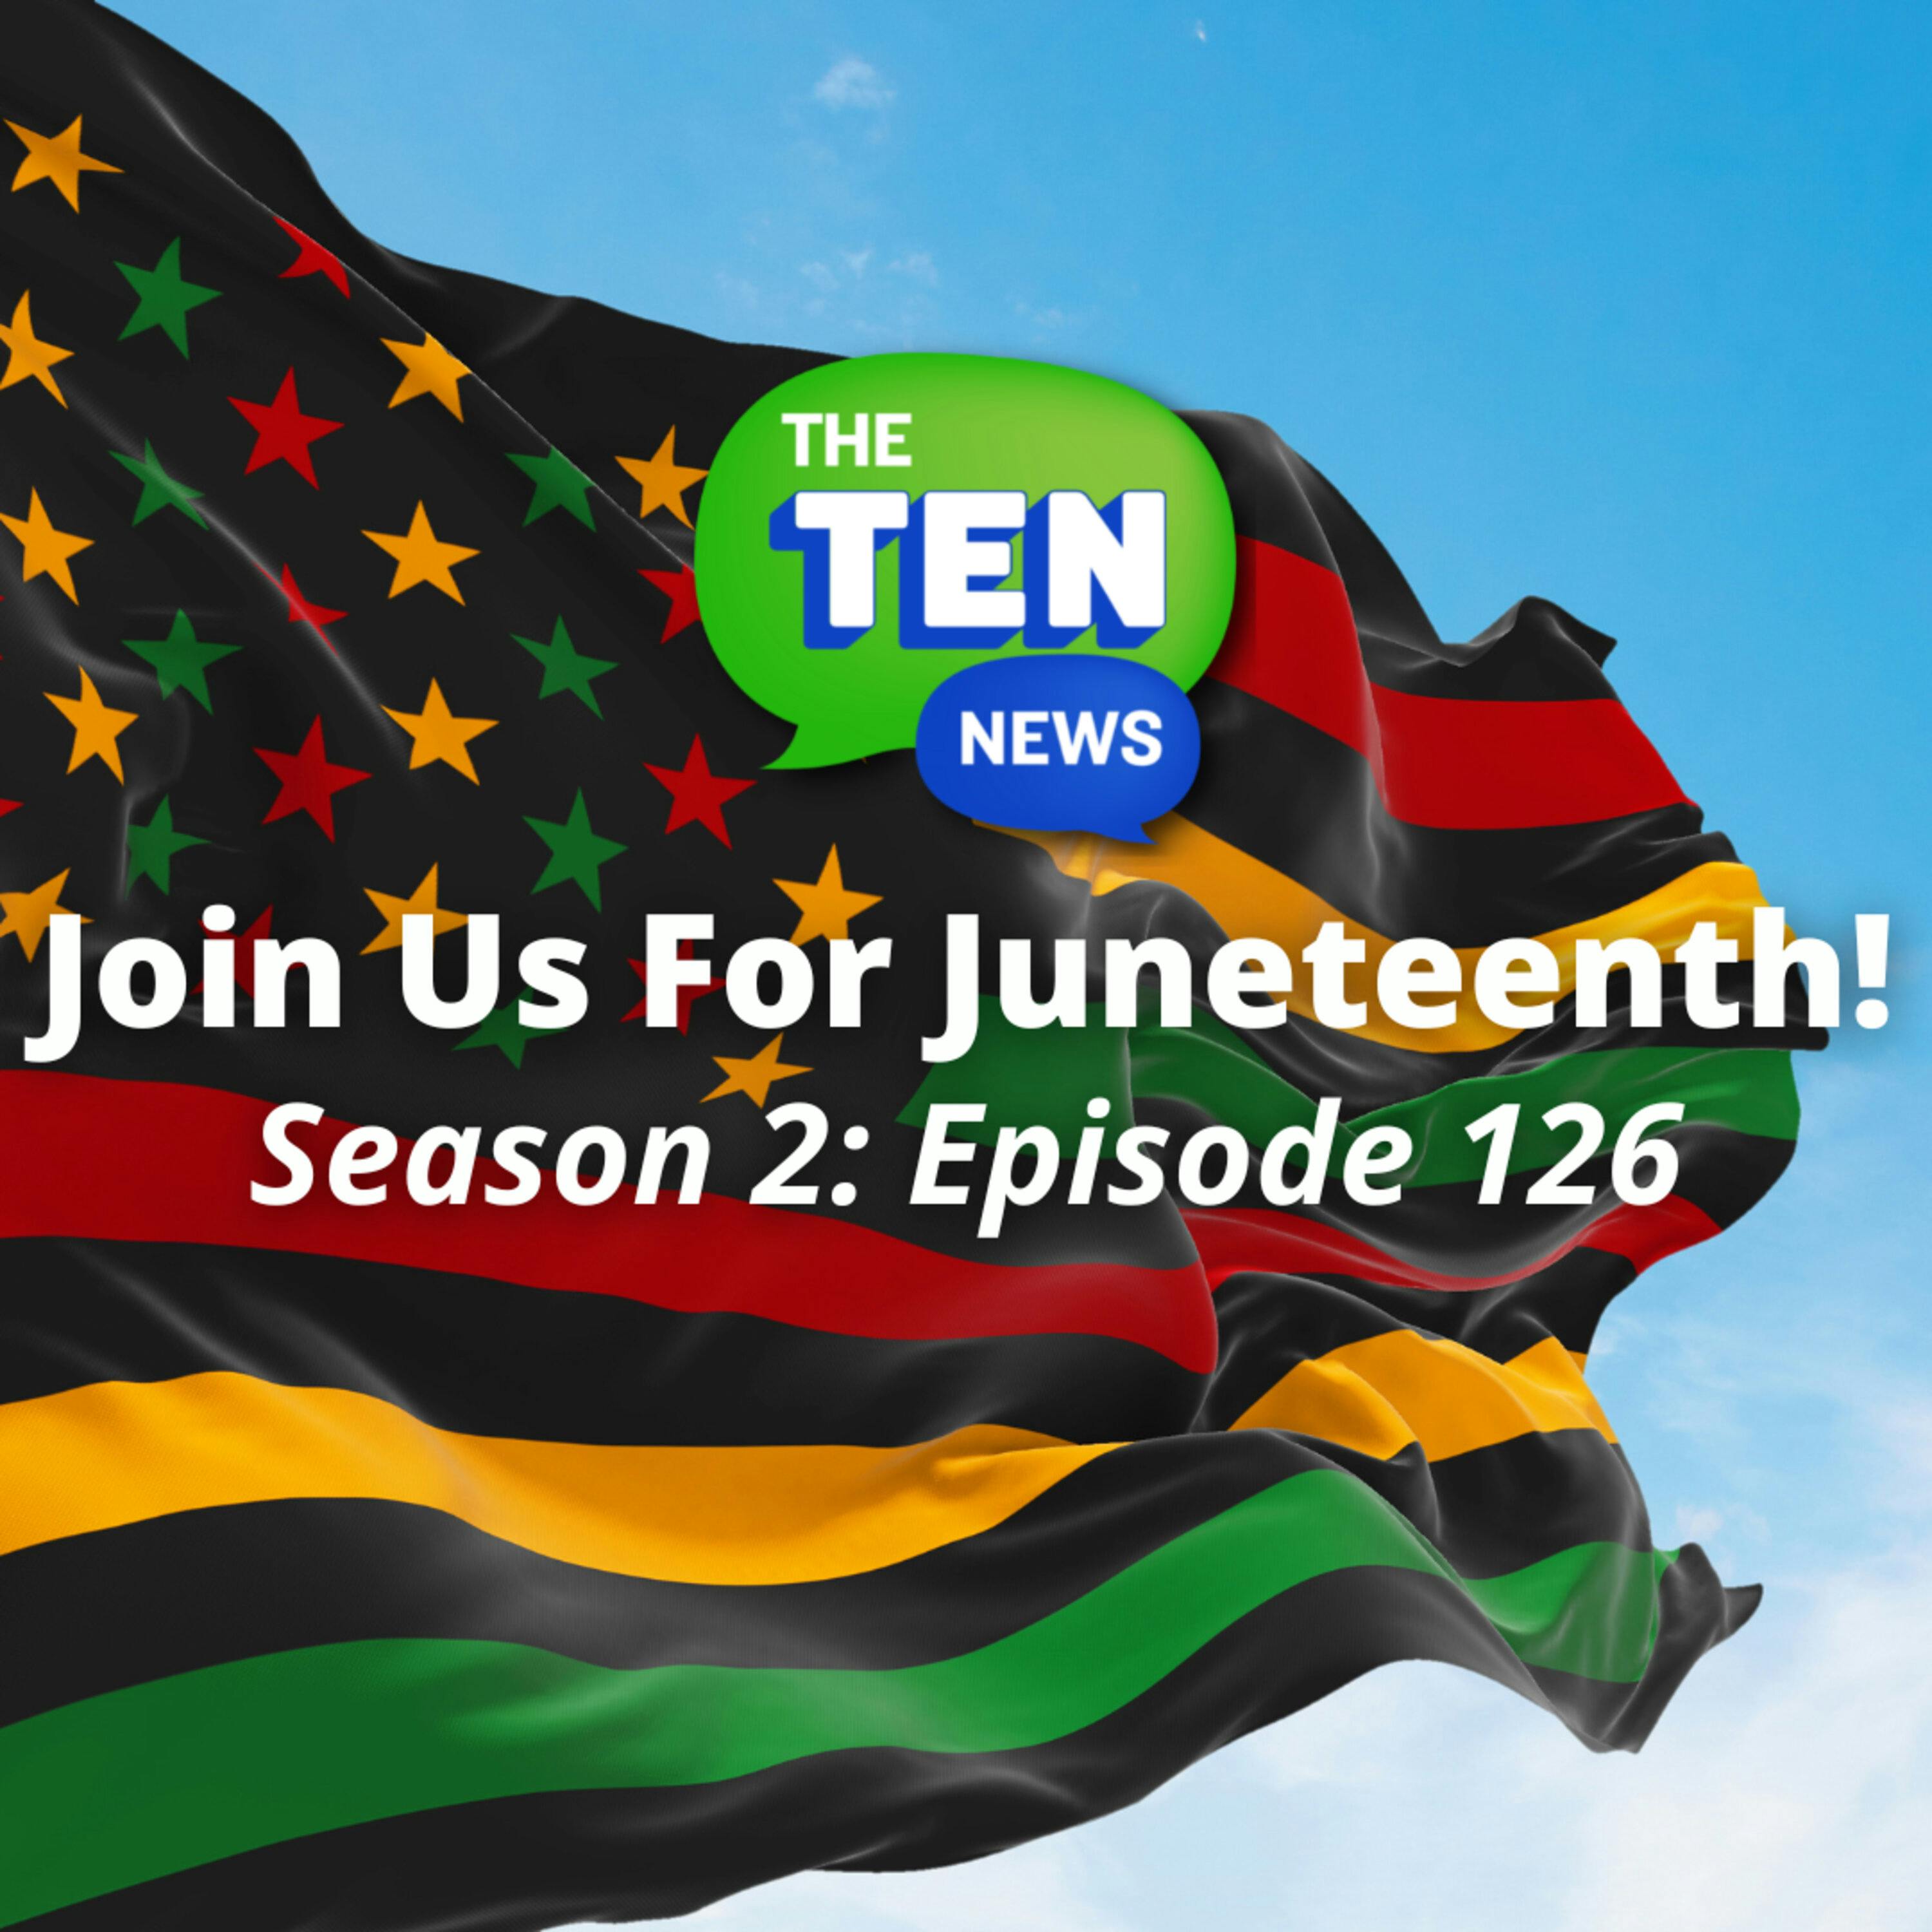 Re-air: Join us for Juneteenth!